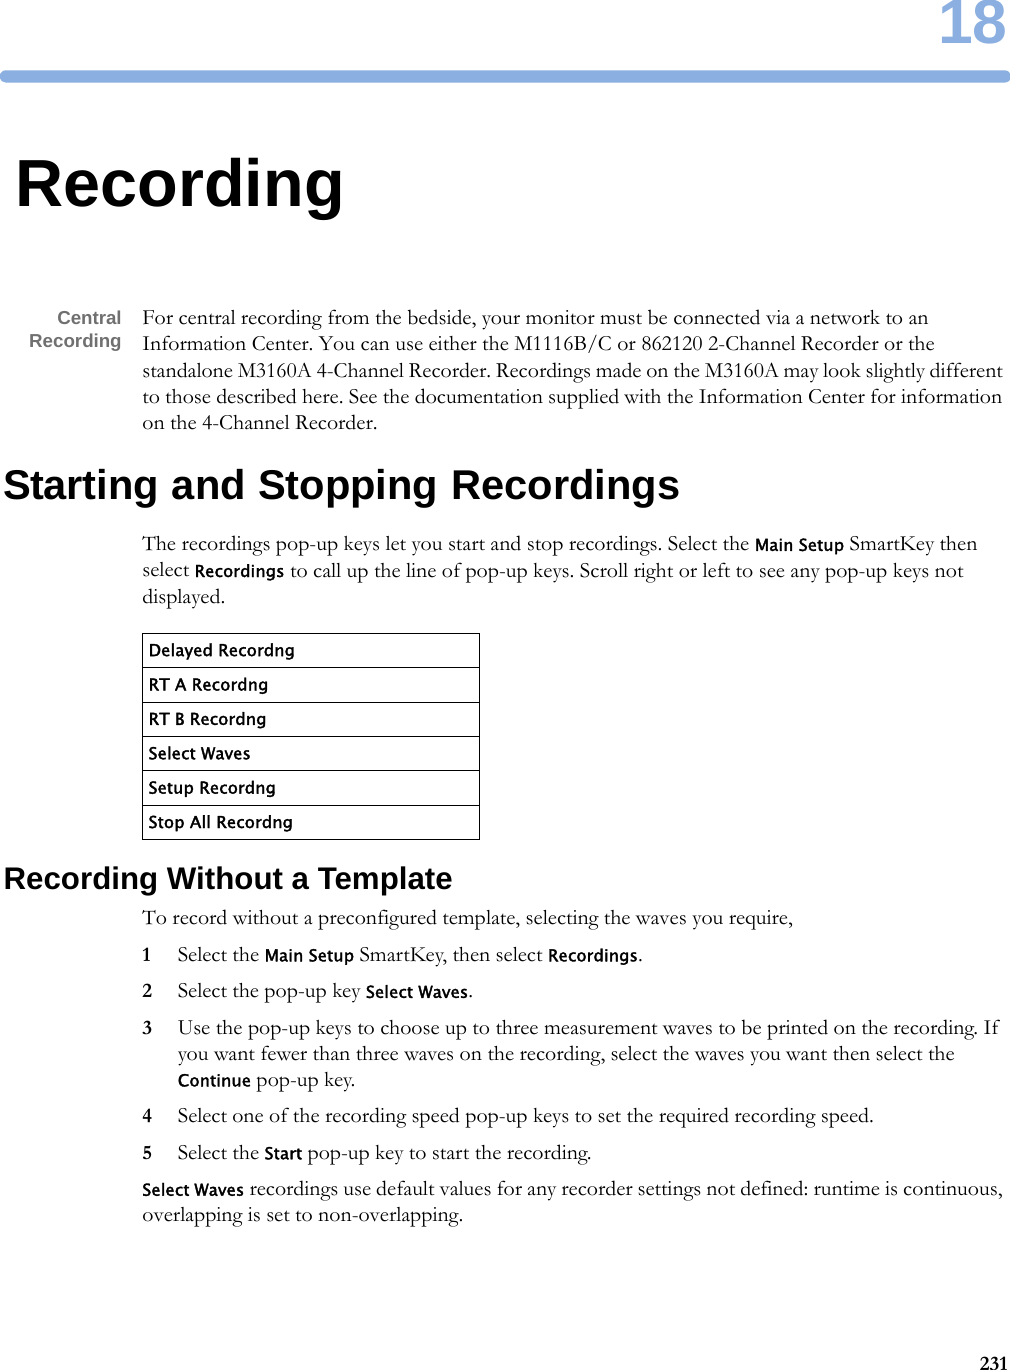 1823118RecordingCentralRecording For central recording from the bedside, your monitor must be connected via a network to an Information Center. You can use either the M1116B/C or 862120 2-Channel Recorder or the standalone M3160A 4-Channel Recorder. Recordings made on the M3160A may look slightly different to those described here. See the documentation supplied with the Information Center for information on the 4-Channel Recorder.Starting and Stopping RecordingsThe recordings pop-up keys let you start and stop recordings. Select the Main Setup SmartKey then select Recordings to call up the line of pop-up keys. Scroll right or left to see any pop-up keys not displayed.Recording Without a TemplateTo record without a preconfigured template, selecting the waves you require,1Select the Main Setup SmartKey, then select Recordings.2Select the pop-up key Select Waves.3Use the pop-up keys to choose up to three measurement waves to be printed on the recording. If you want fewer than three waves on the recording, select the waves you want then select the Continue pop-up key.4Select one of the recording speed pop-up keys to set the required recording speed.5Select the Start pop-up key to start the recording.Select Waves recordings use default values for any recorder settings not defined: runtime is continuous, overlapping is set to non-overlapping.Delayed RecordngRT A RecordngRT B RecordngSelect WavesSetup RecordngStop All Recordng